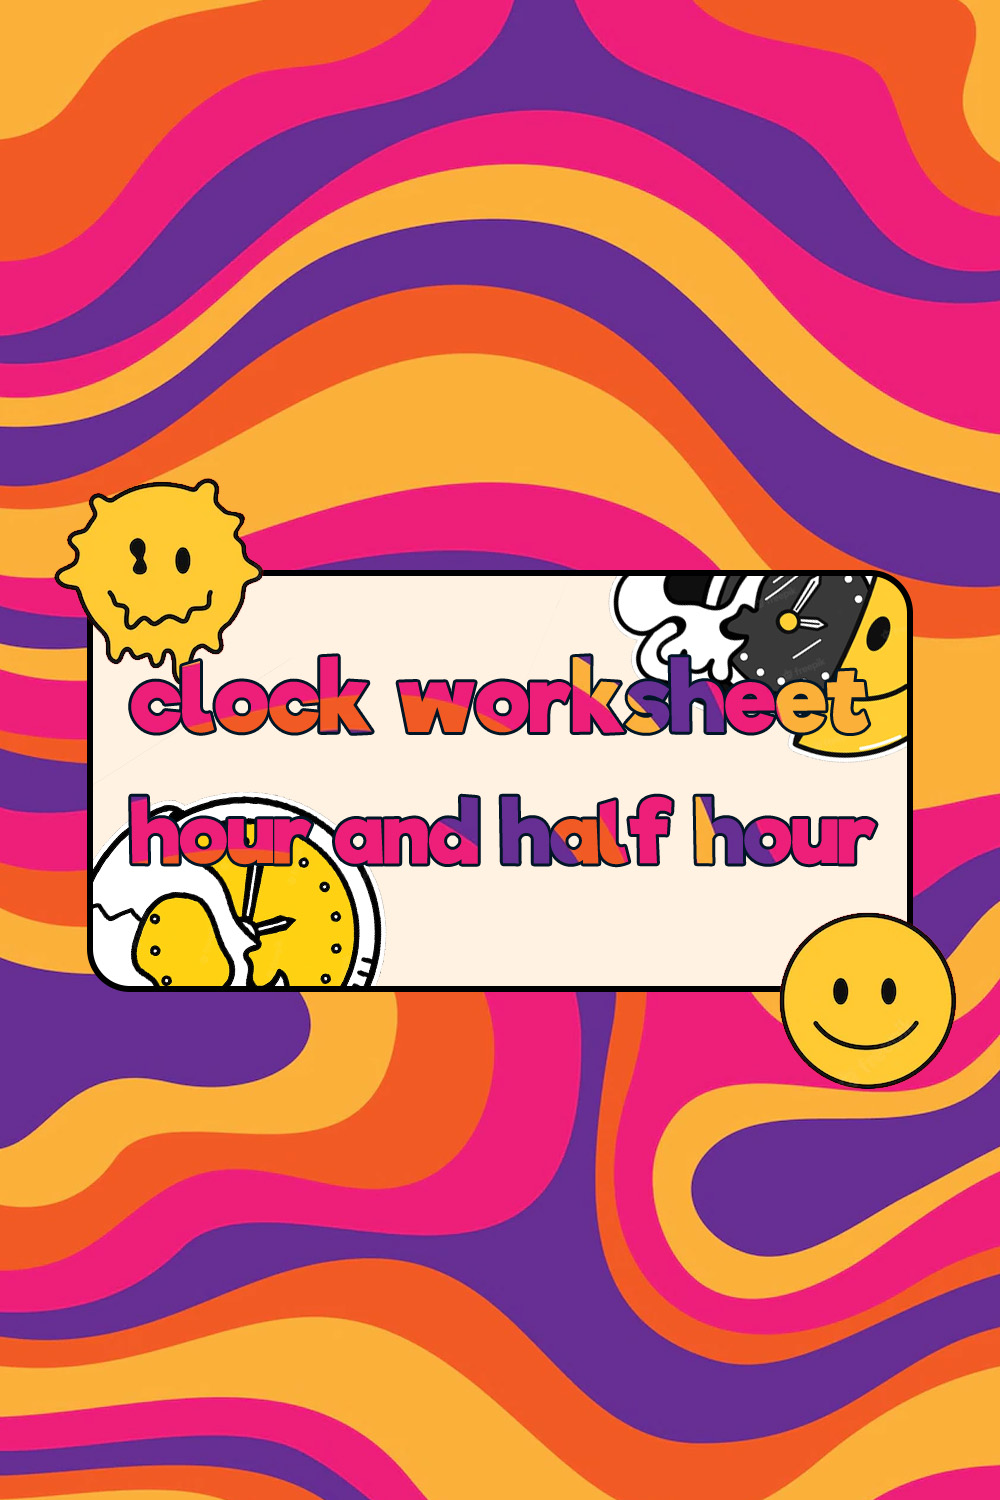 15 Images of Clock Worksheet Hour And Half Hour